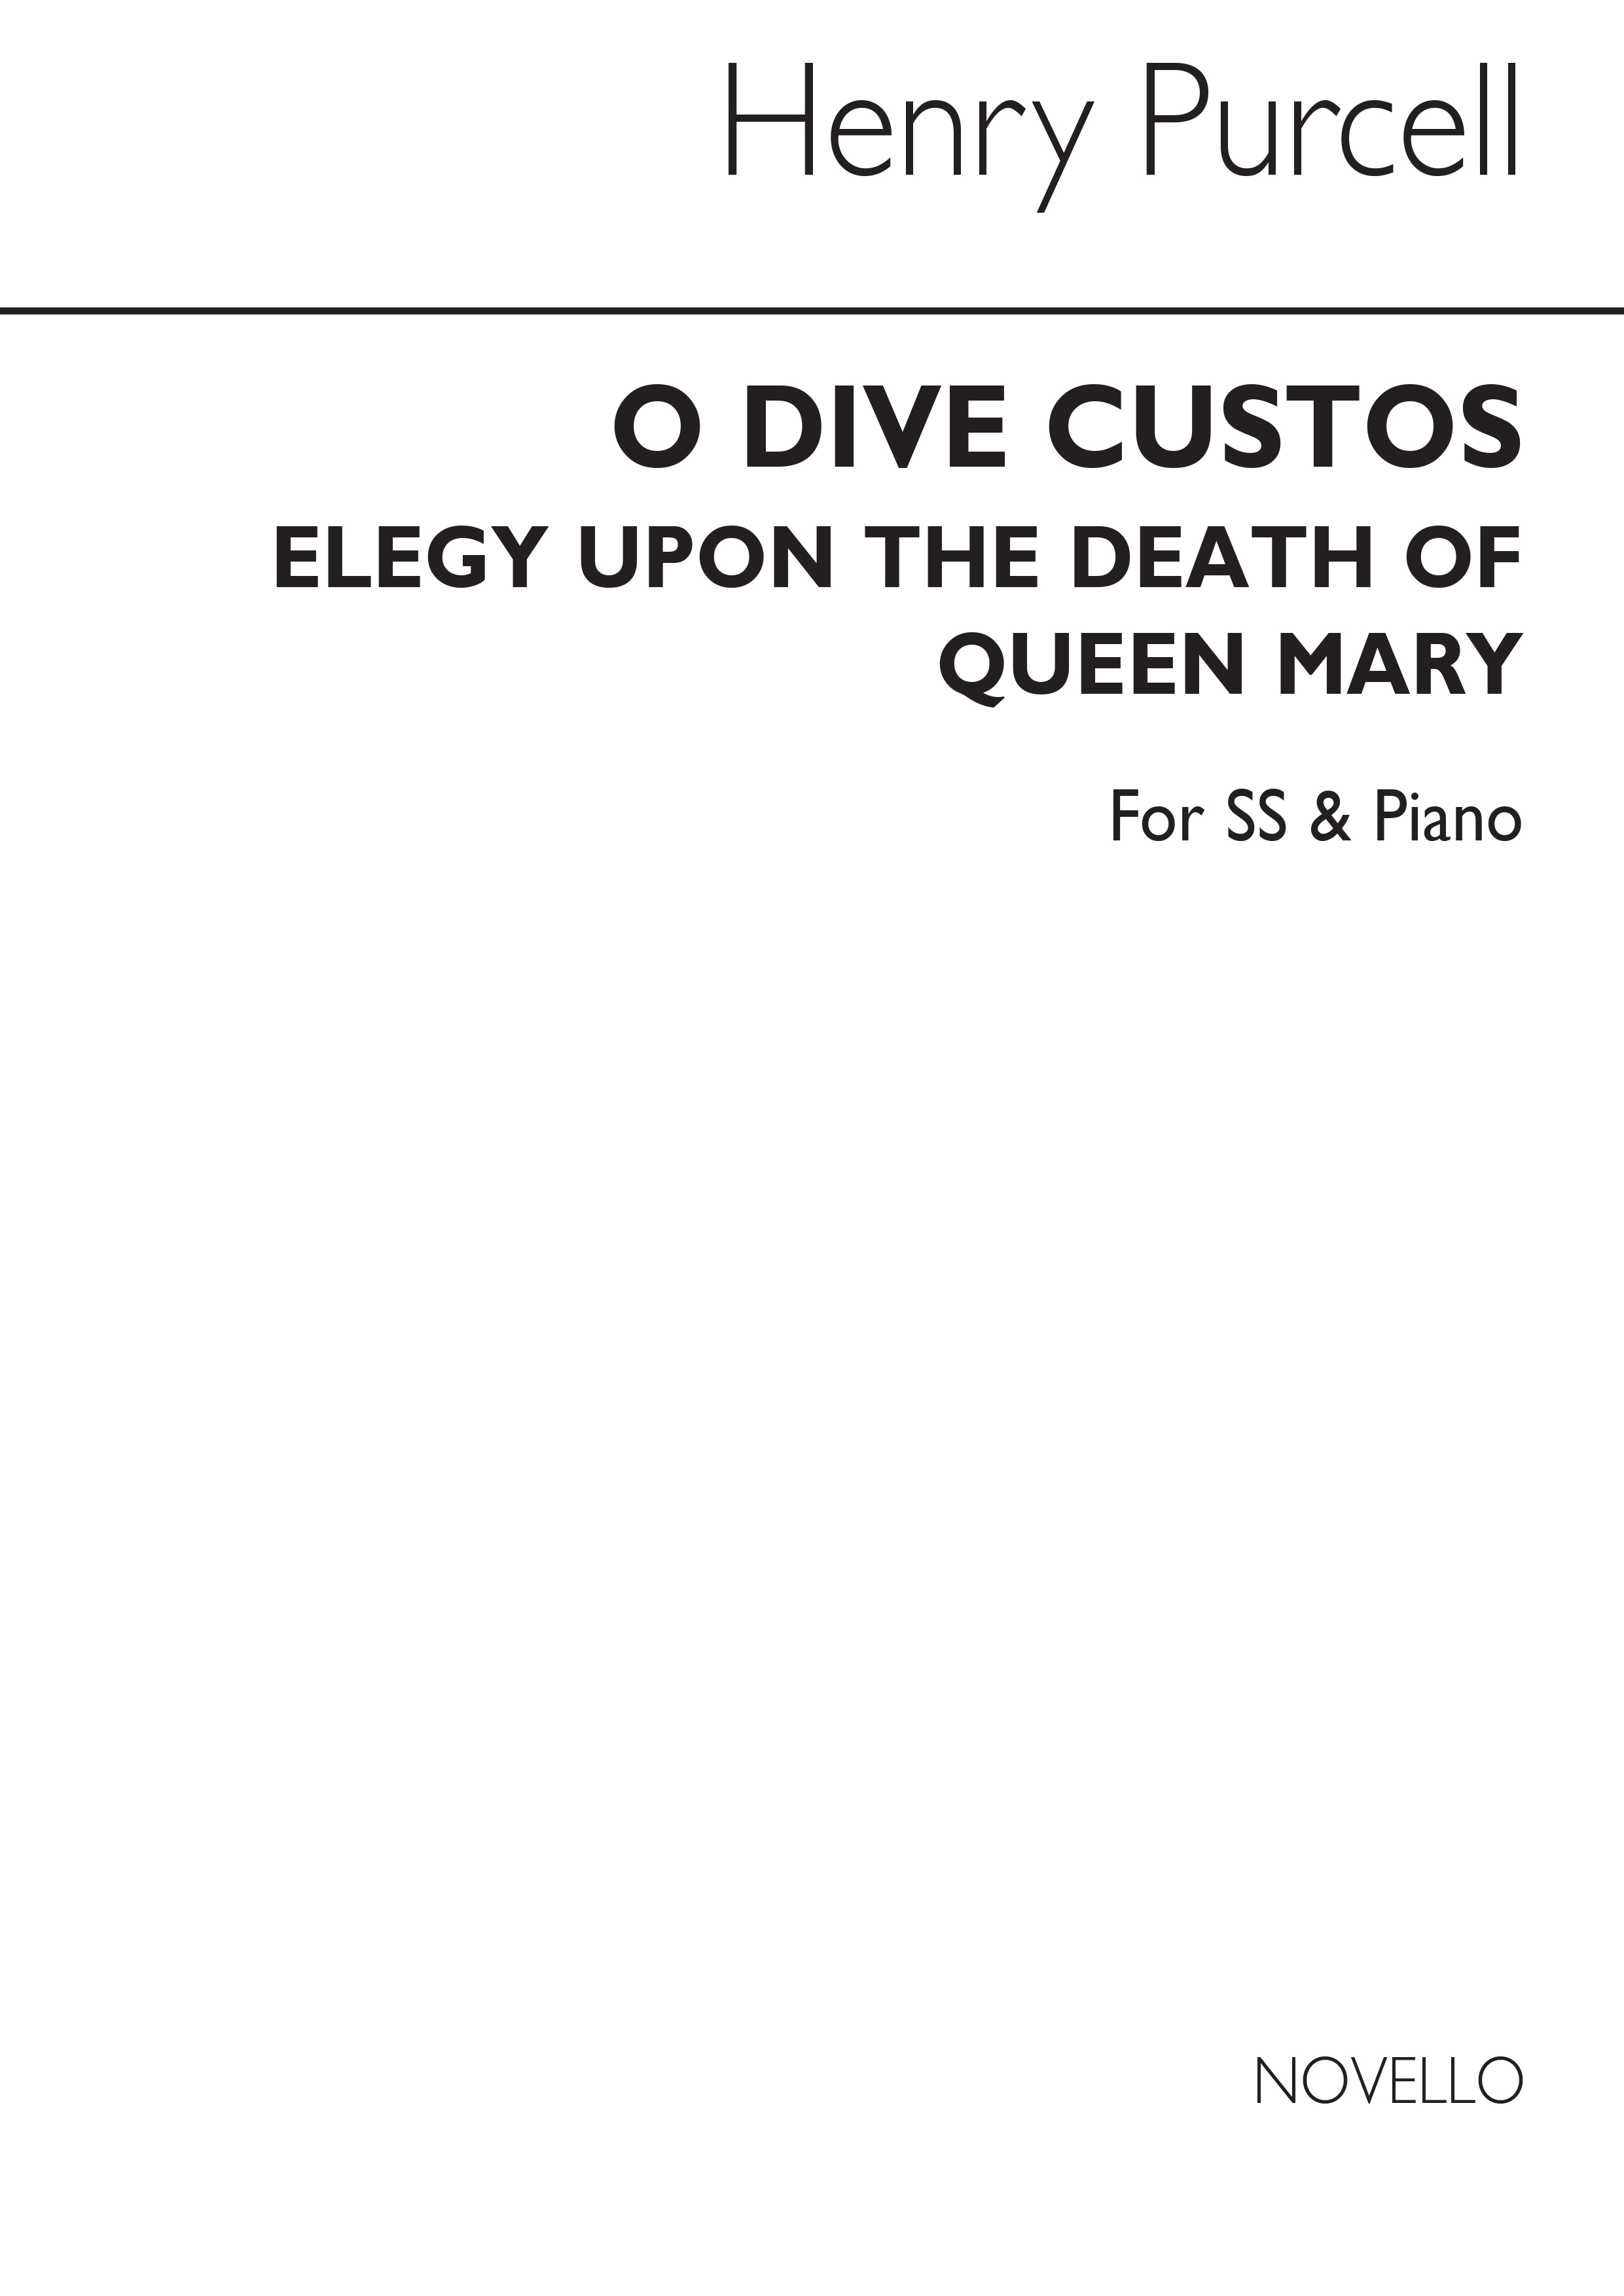 Henry Purcell: O Dive Custos Elegy Upon The Death Of Queen Mary